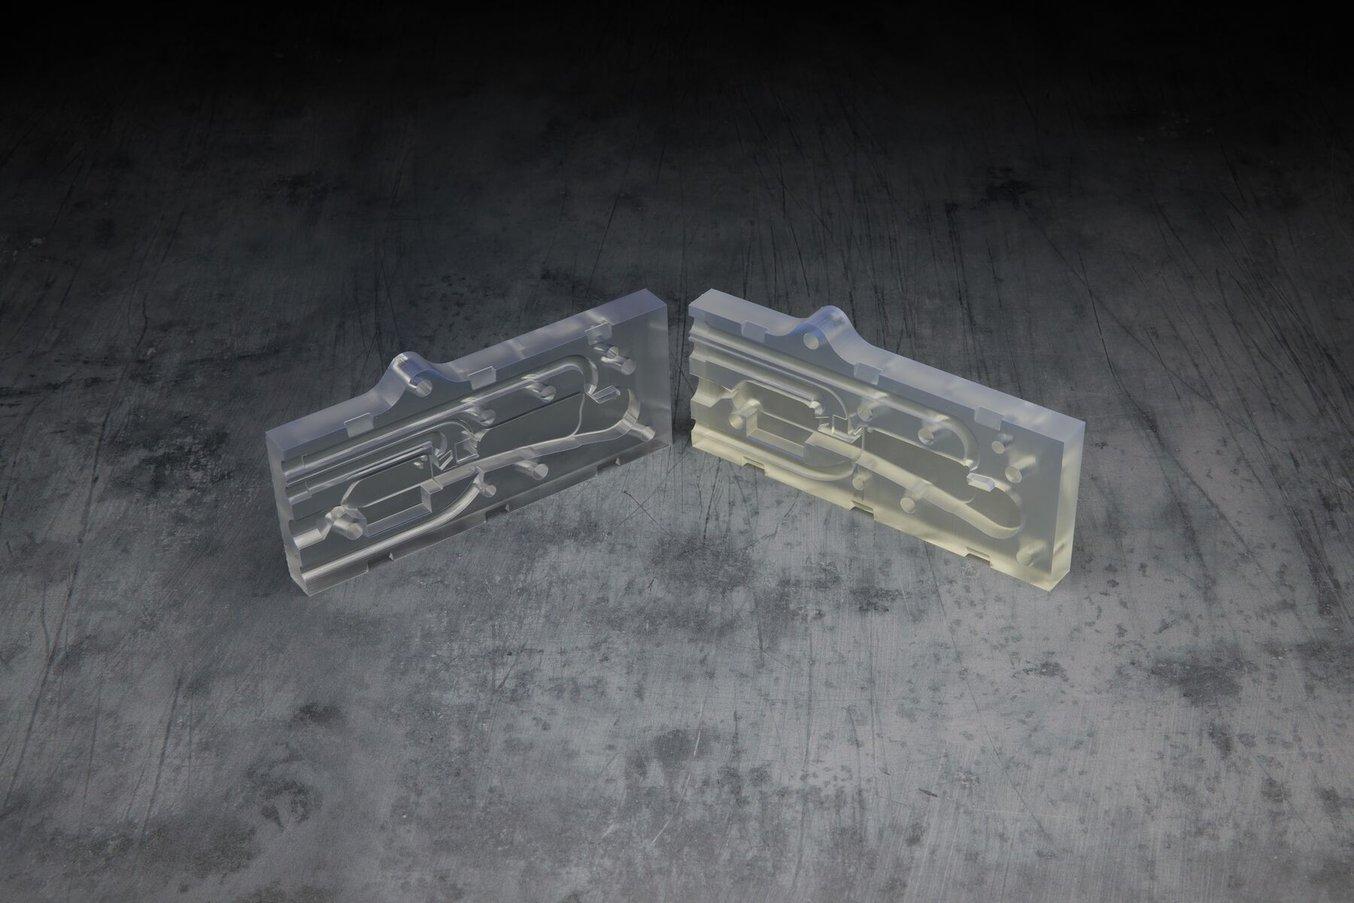 Two clear parts of a mold. The one on the left is clearer and more transparent, the one on the right is more yellowy